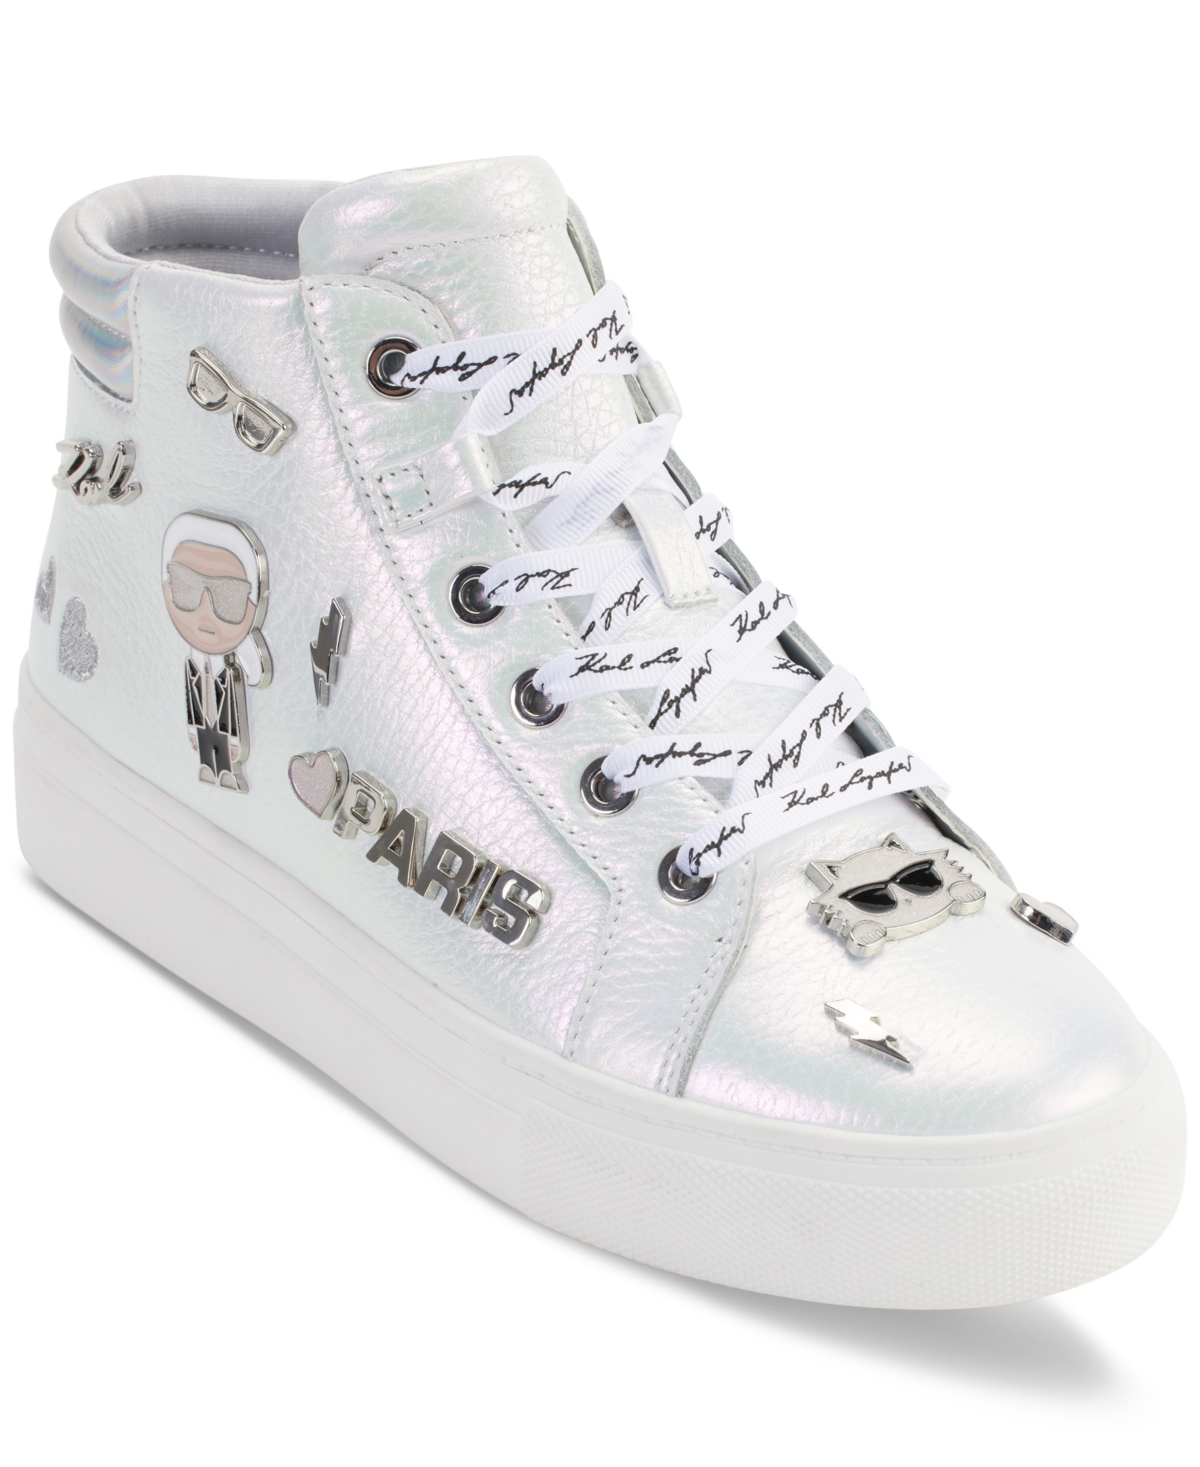 Karl Lagerfeld Catty High Top Sneaker In Ird:irridescent